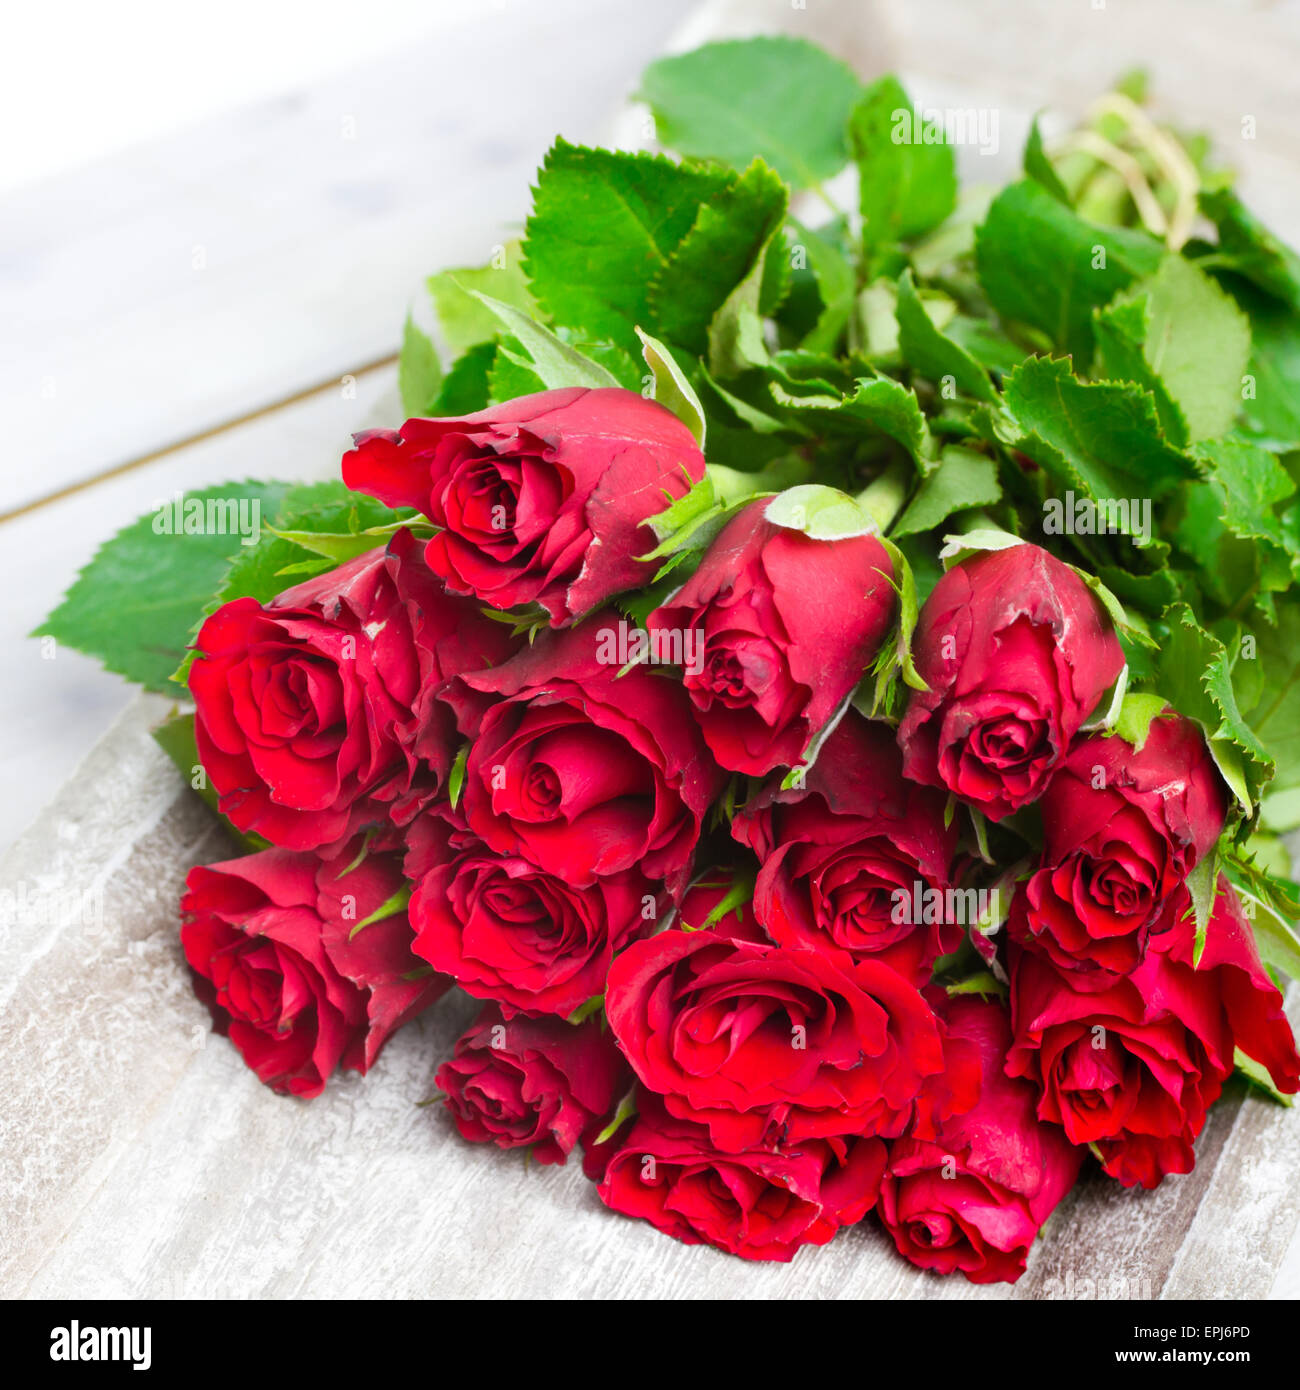 red roses Stock Photo